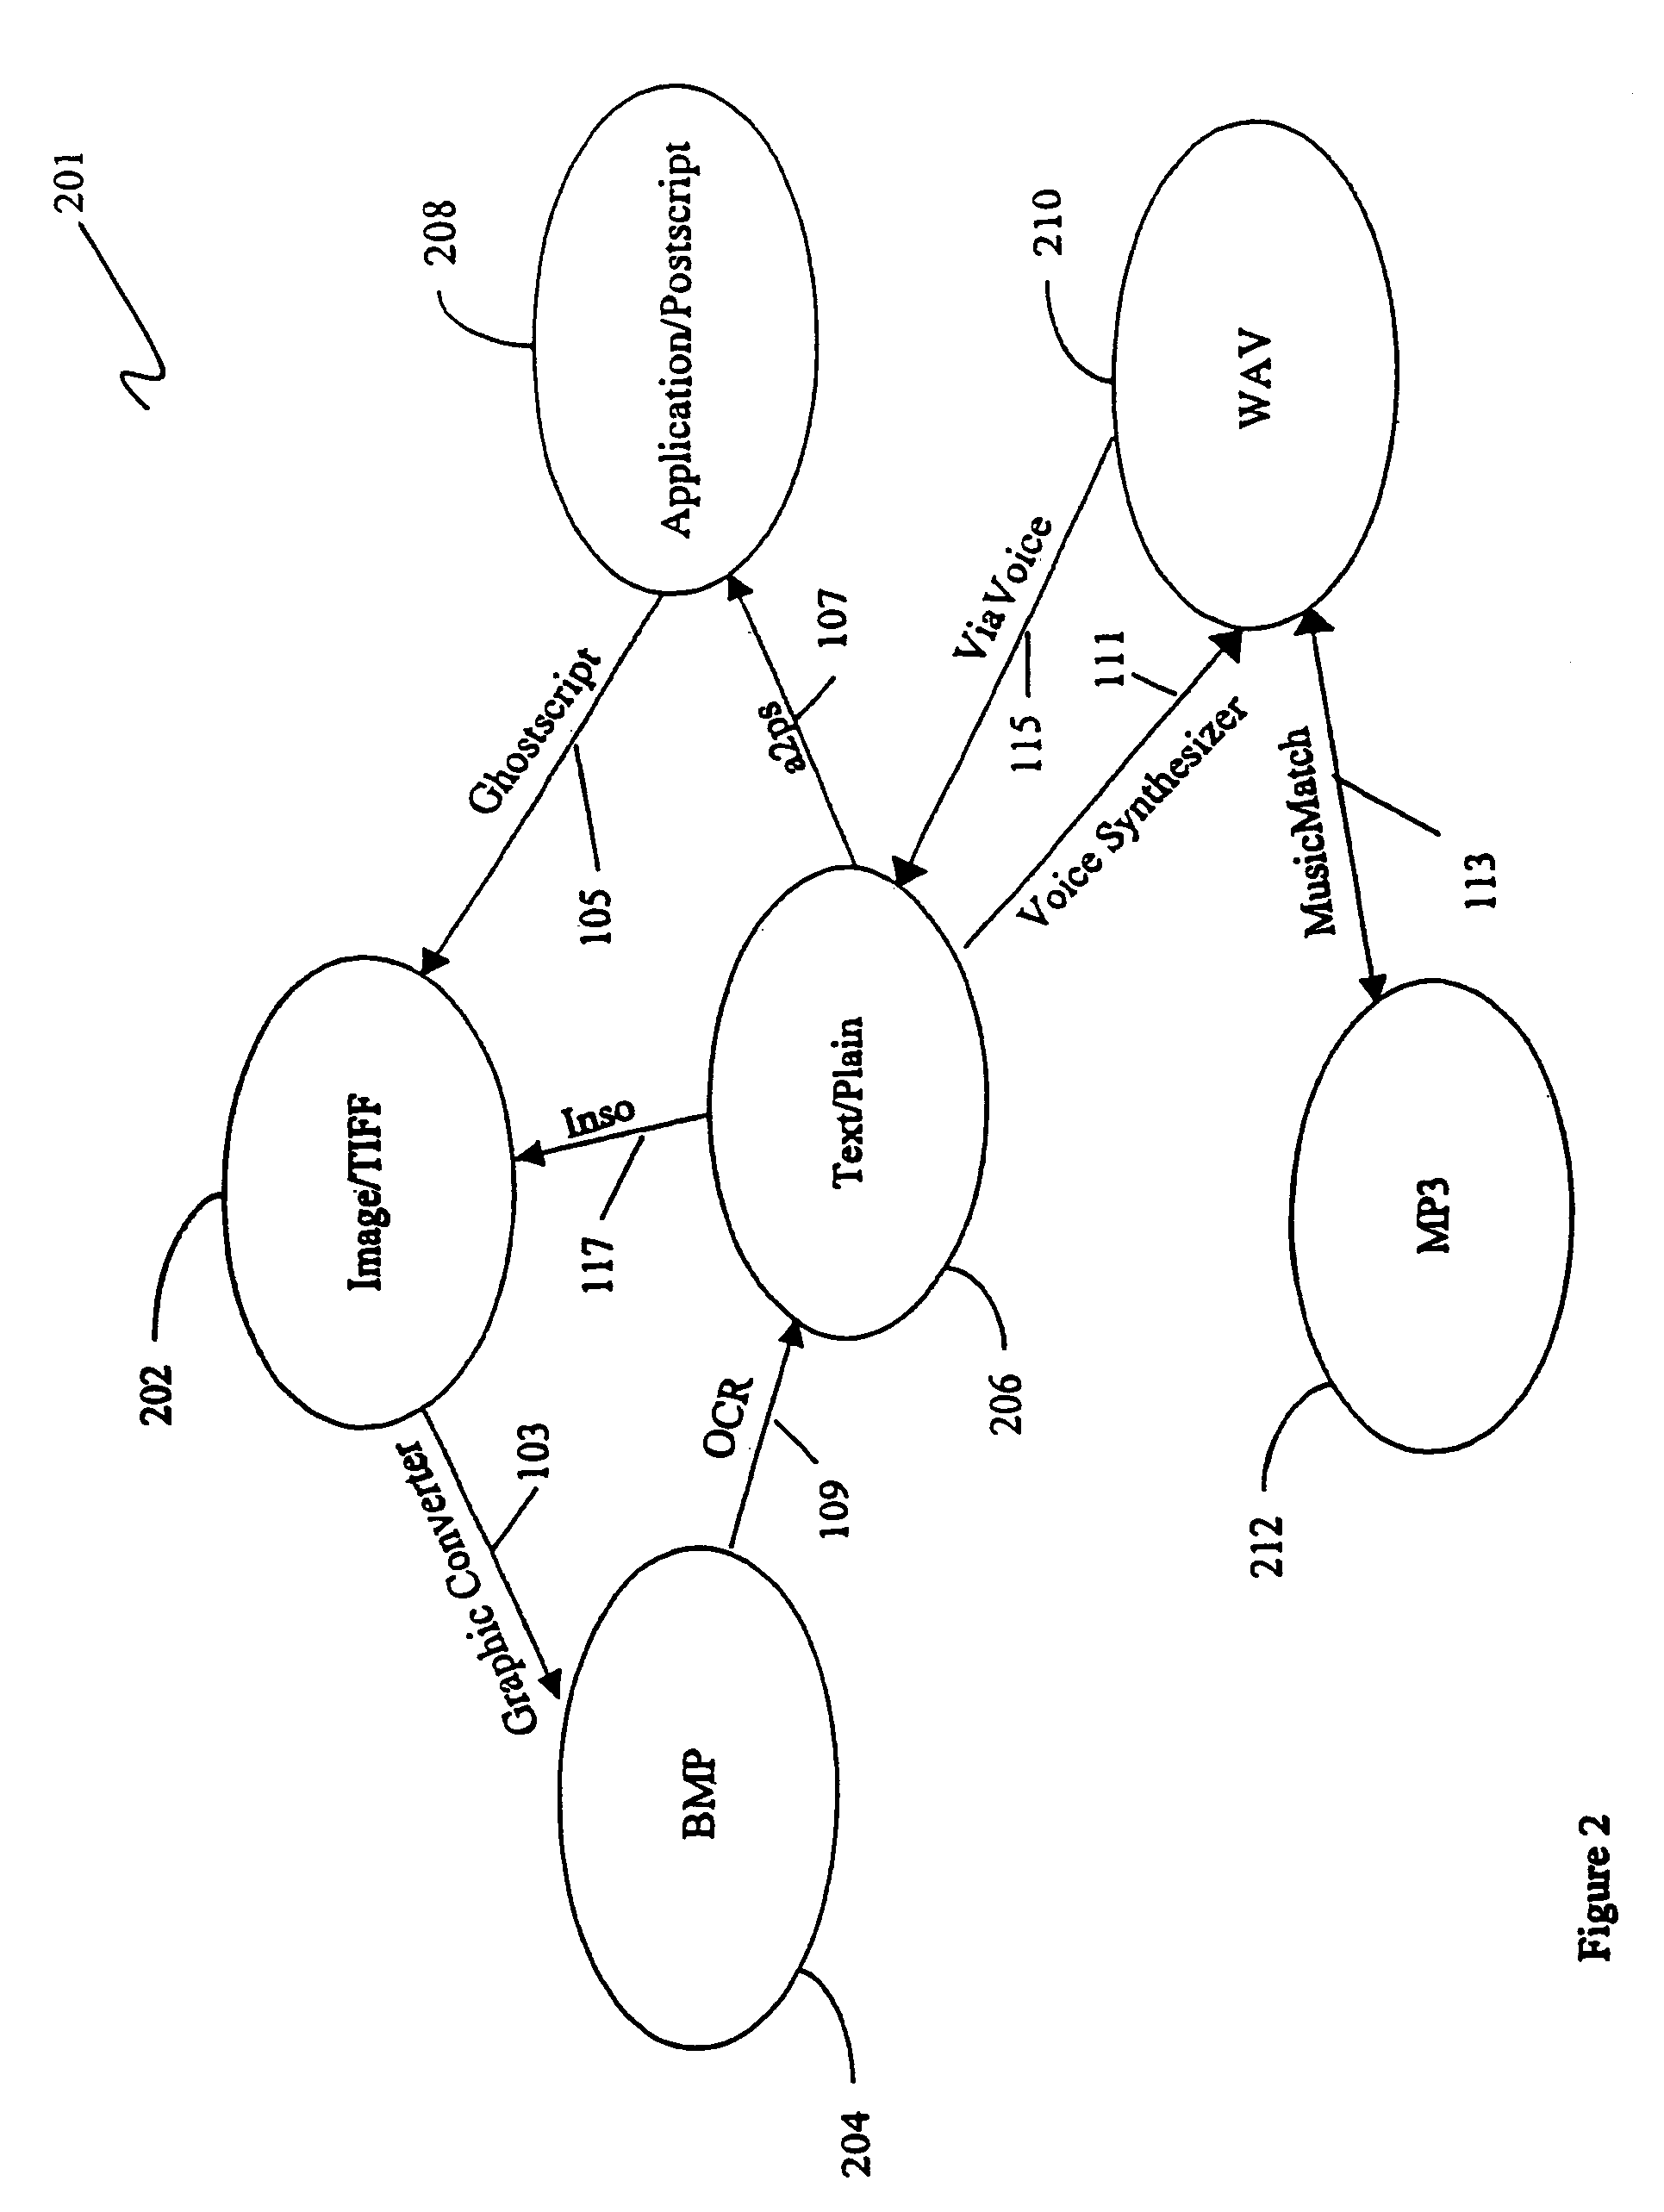 Flexible scalable file conversion system and method